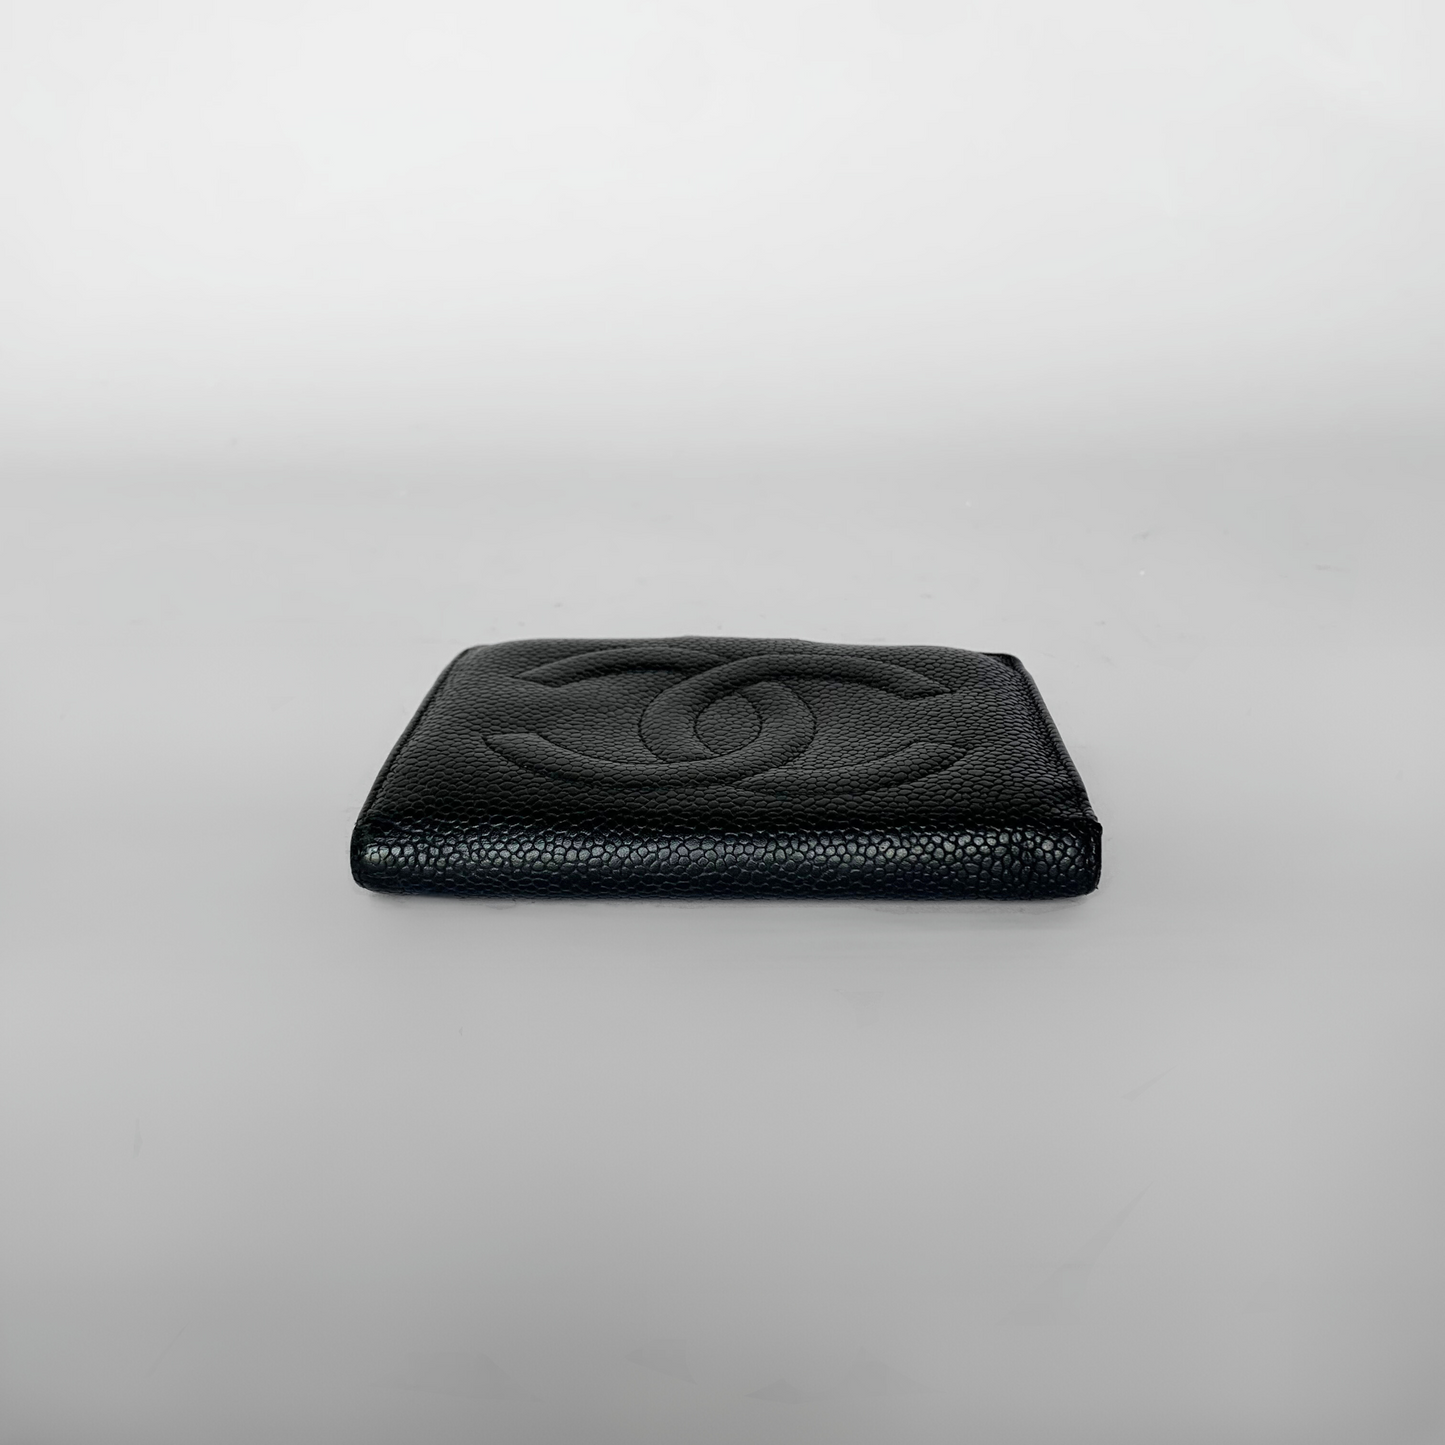 Chanel Chanel Wallet Small Caviar Leather - Wallets - Etoile Luxury Vintage